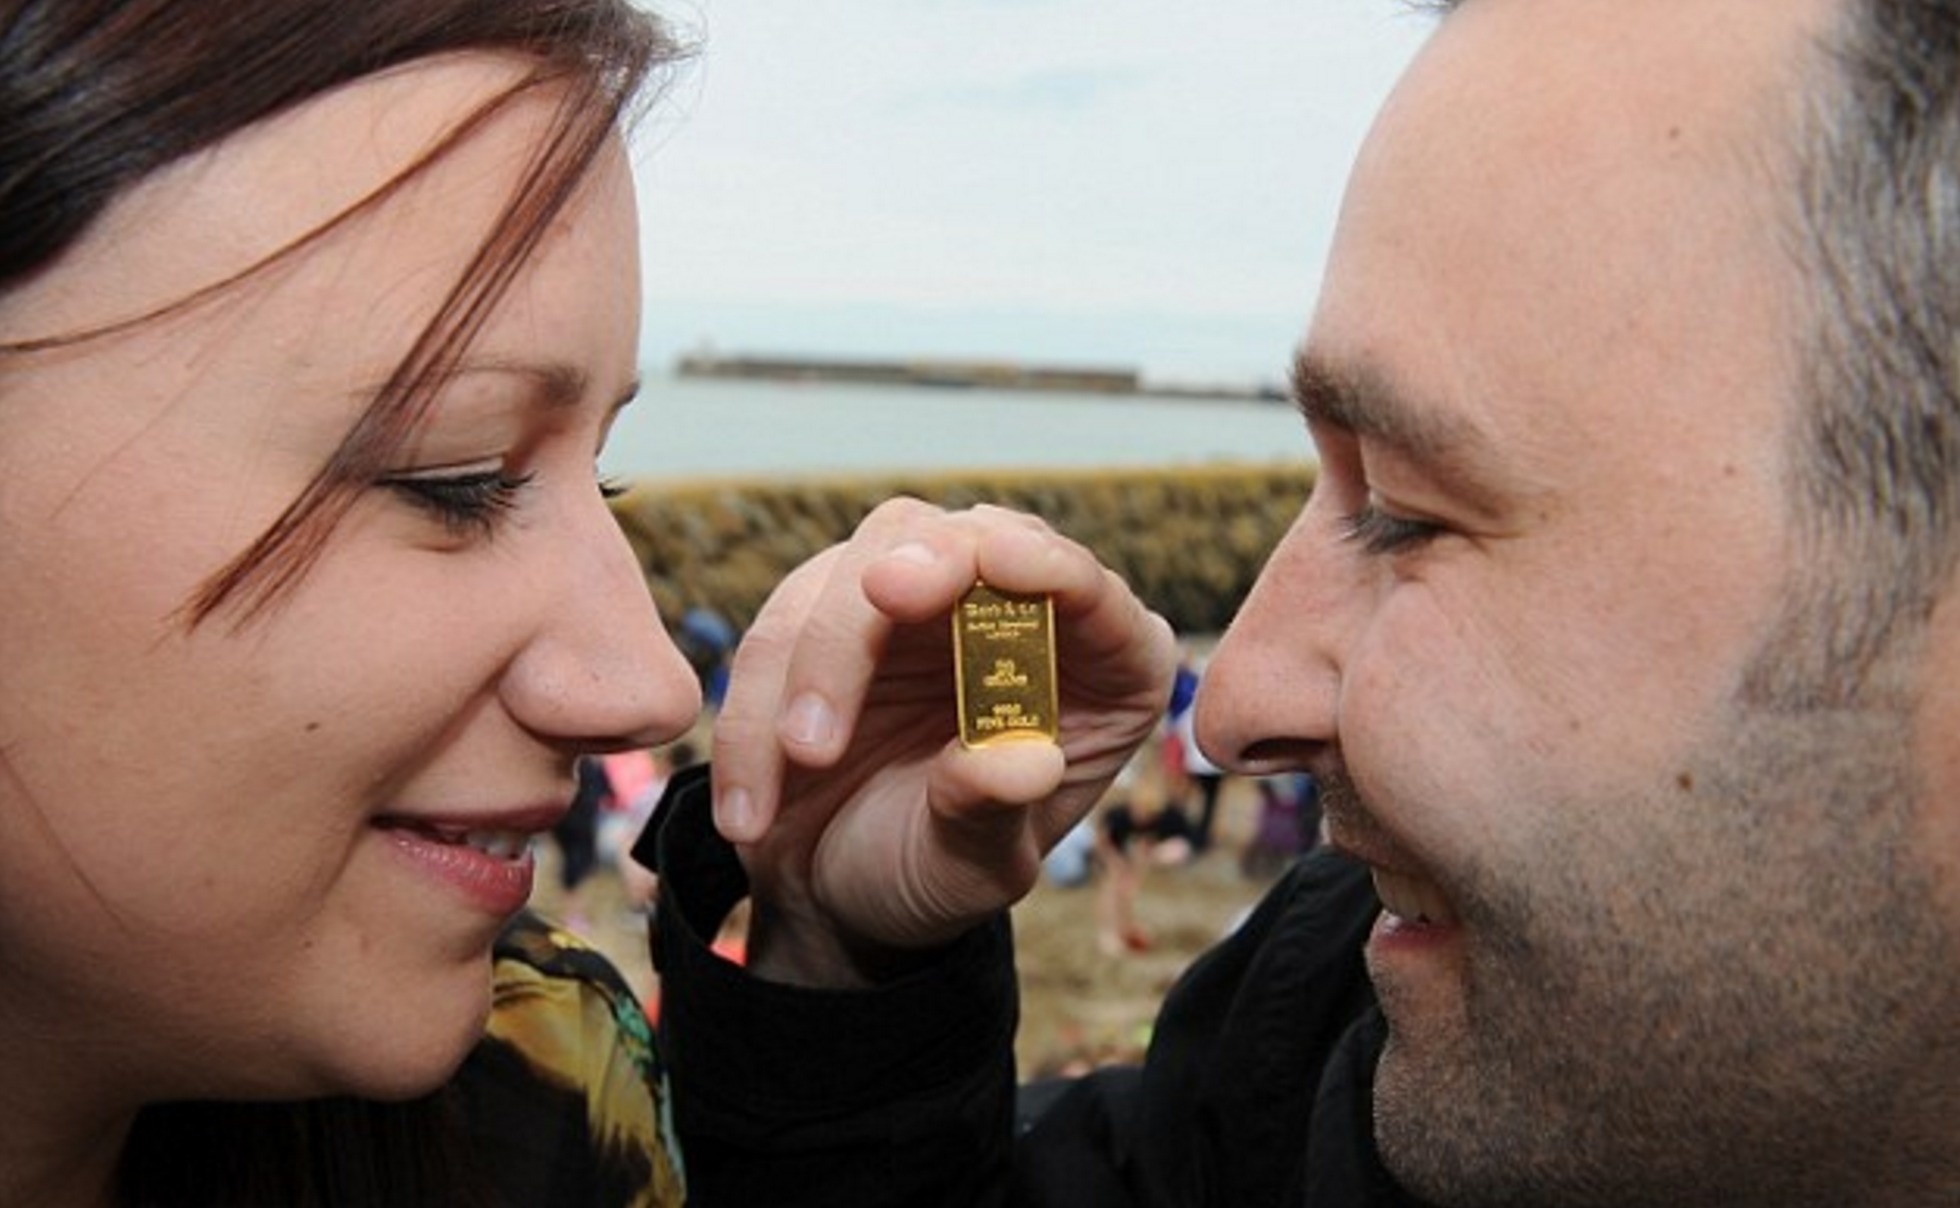 A couple from Kent, England dug up a 24-carat gold bar worth £500 on the beach. German artist Michael Sailstorfer hid 30 bars as part of a project